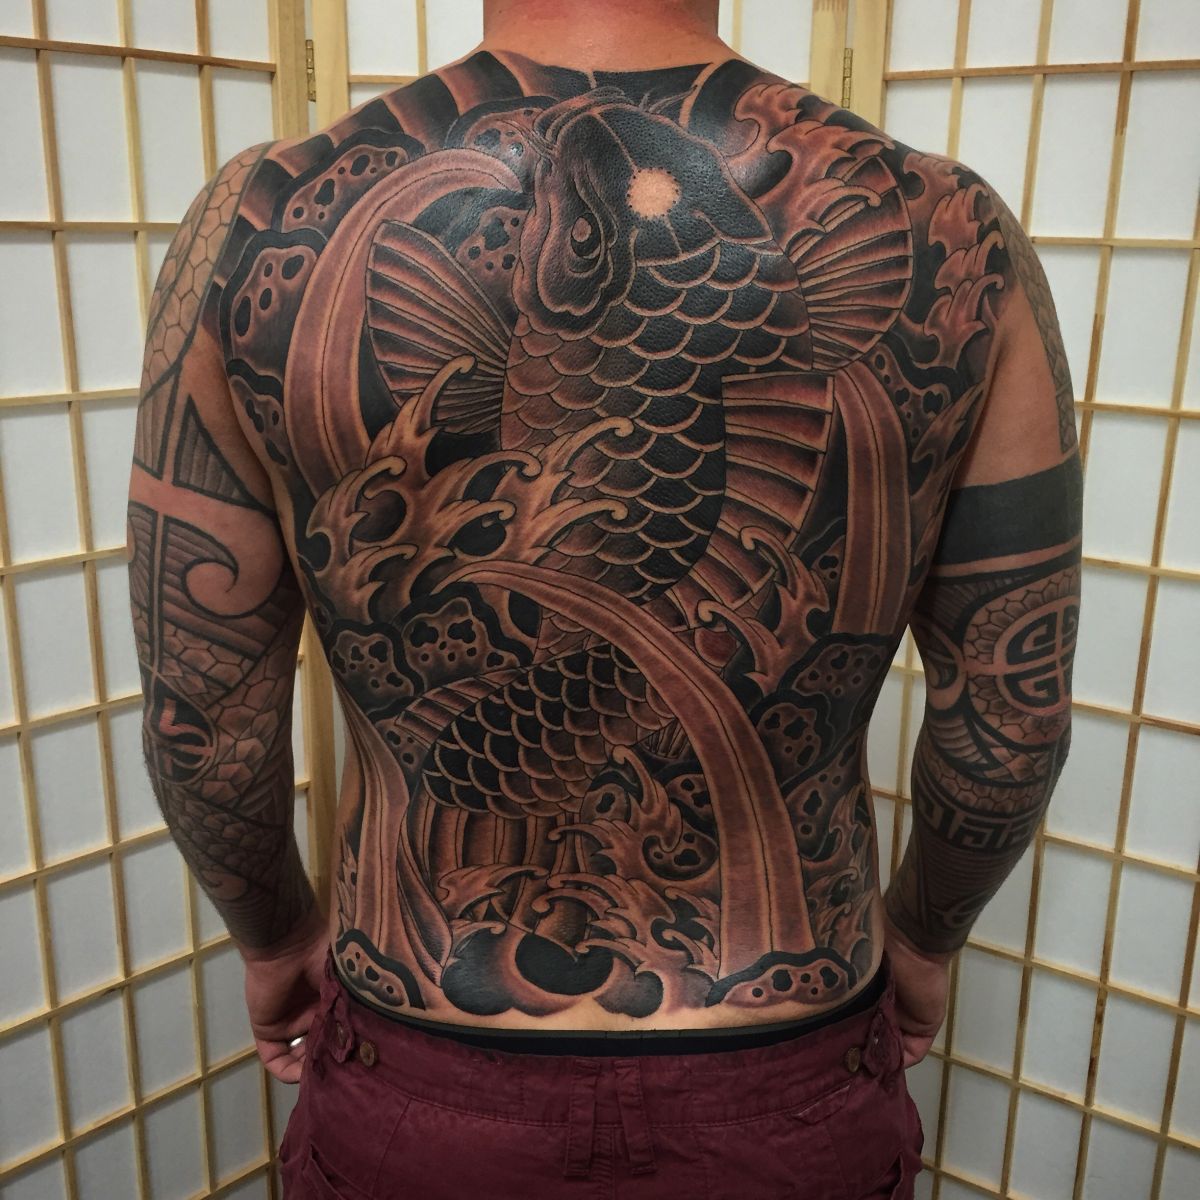 Full backpiece completed over 3 consecutive days 